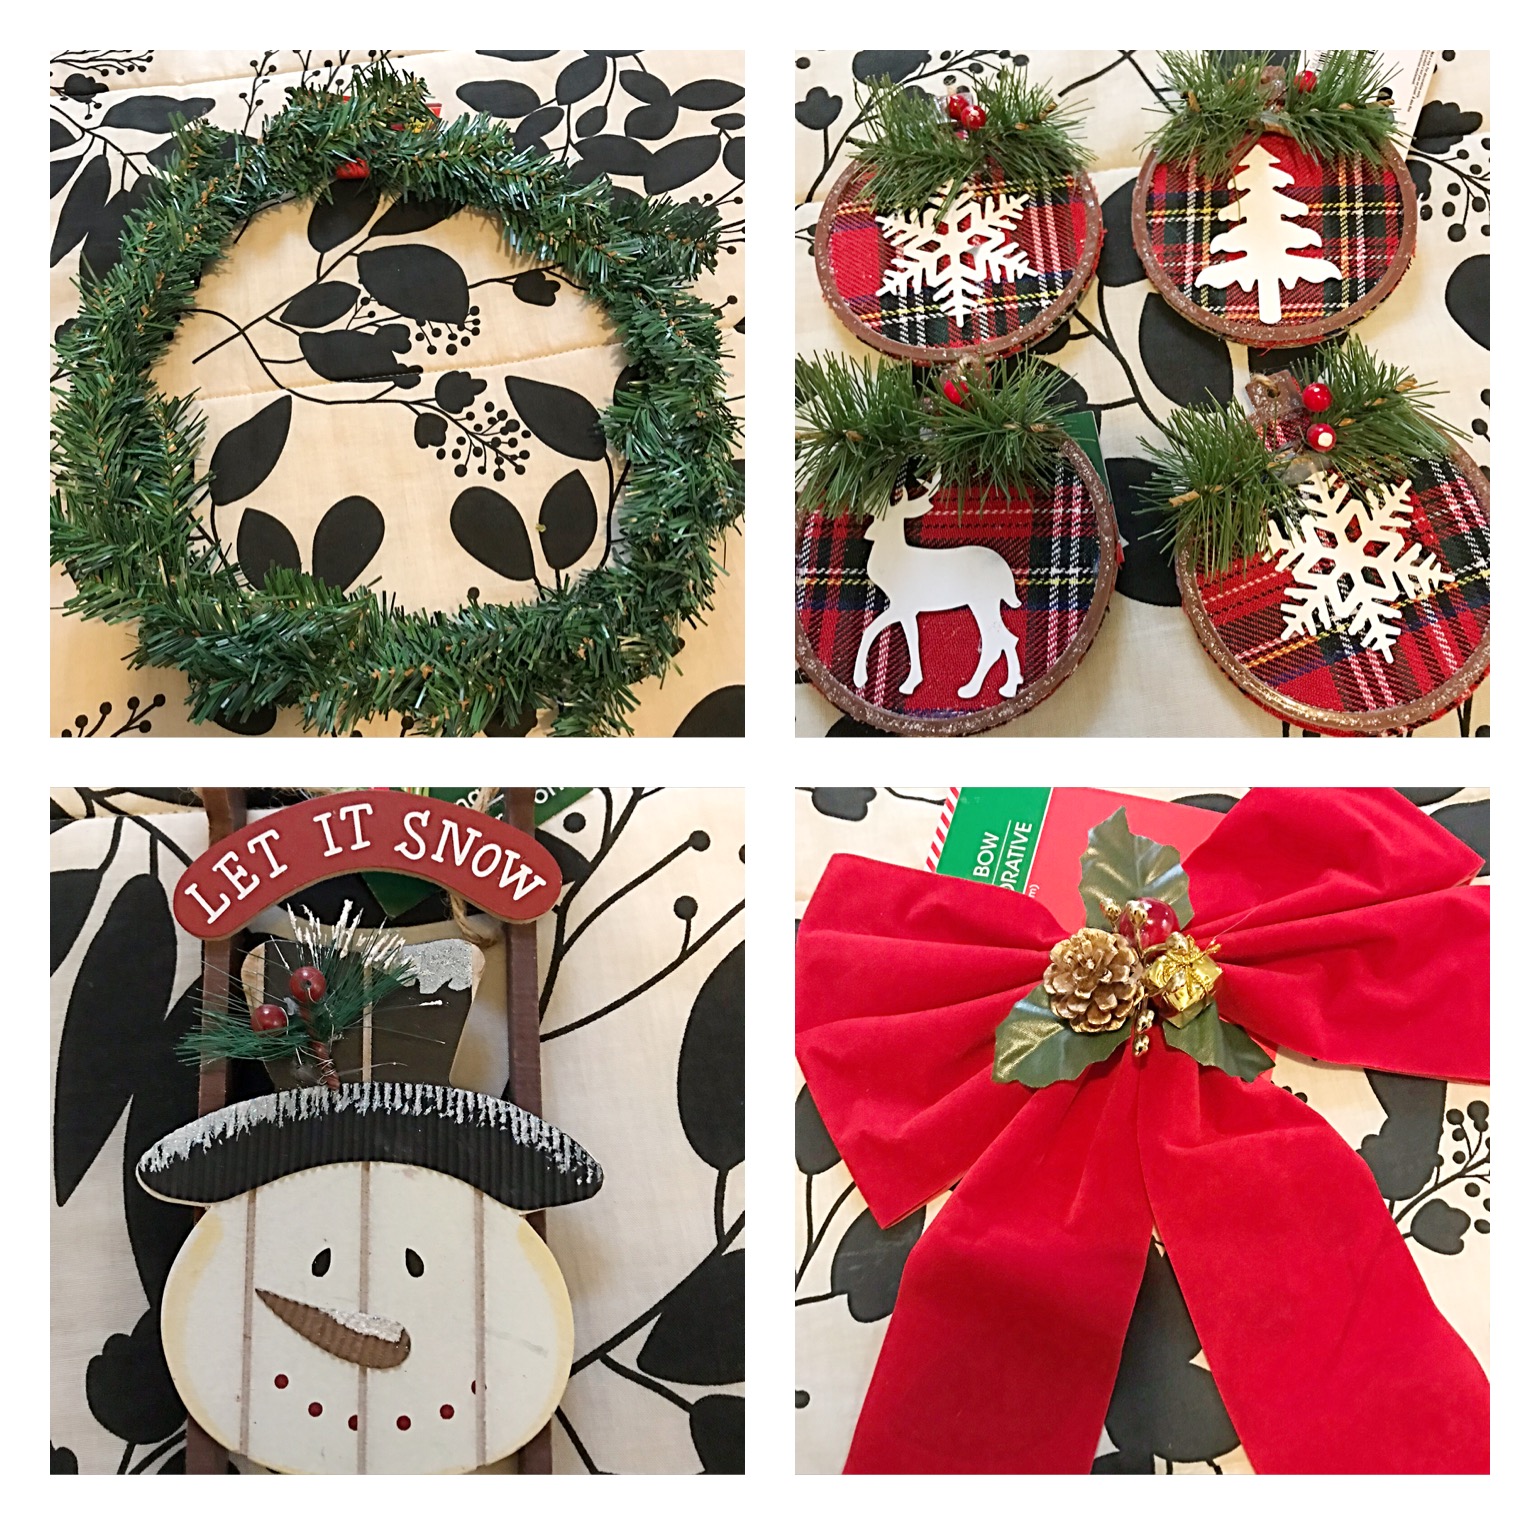 Grab a Dollar Store wreath framethis holiday trend is MAGICAL! 